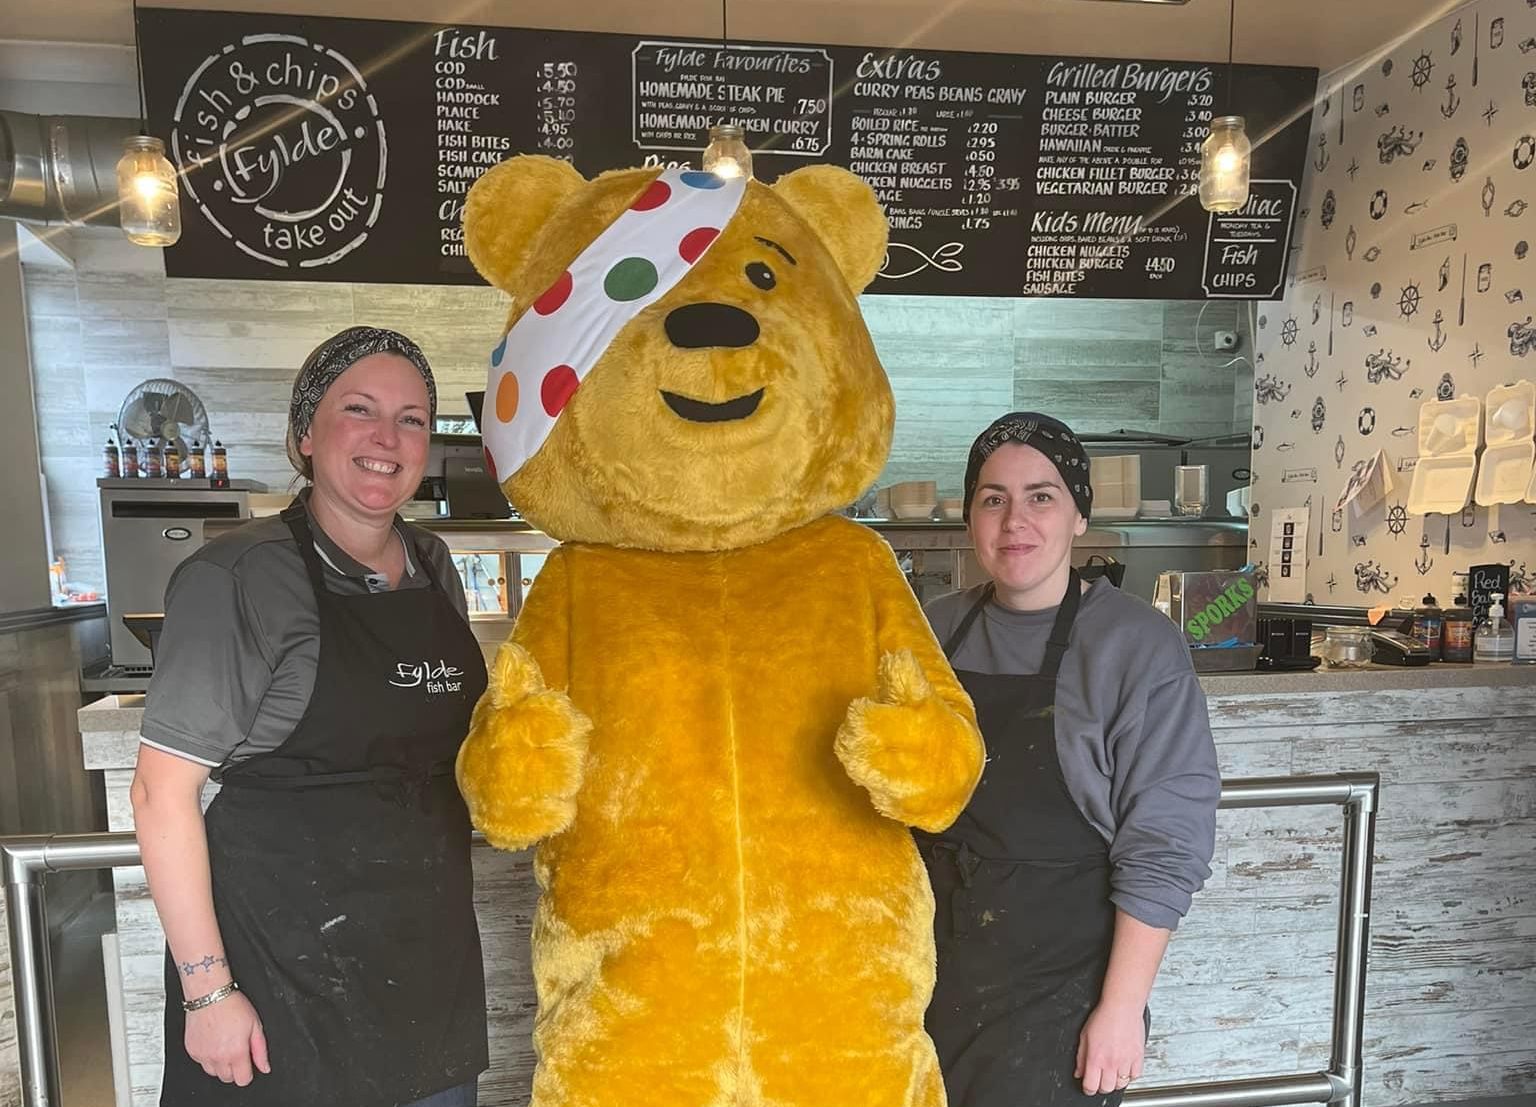 Pudsey Bear was brought to Fylde Fish Bar in Southport by volunteers from Southport Hesketh Round Table